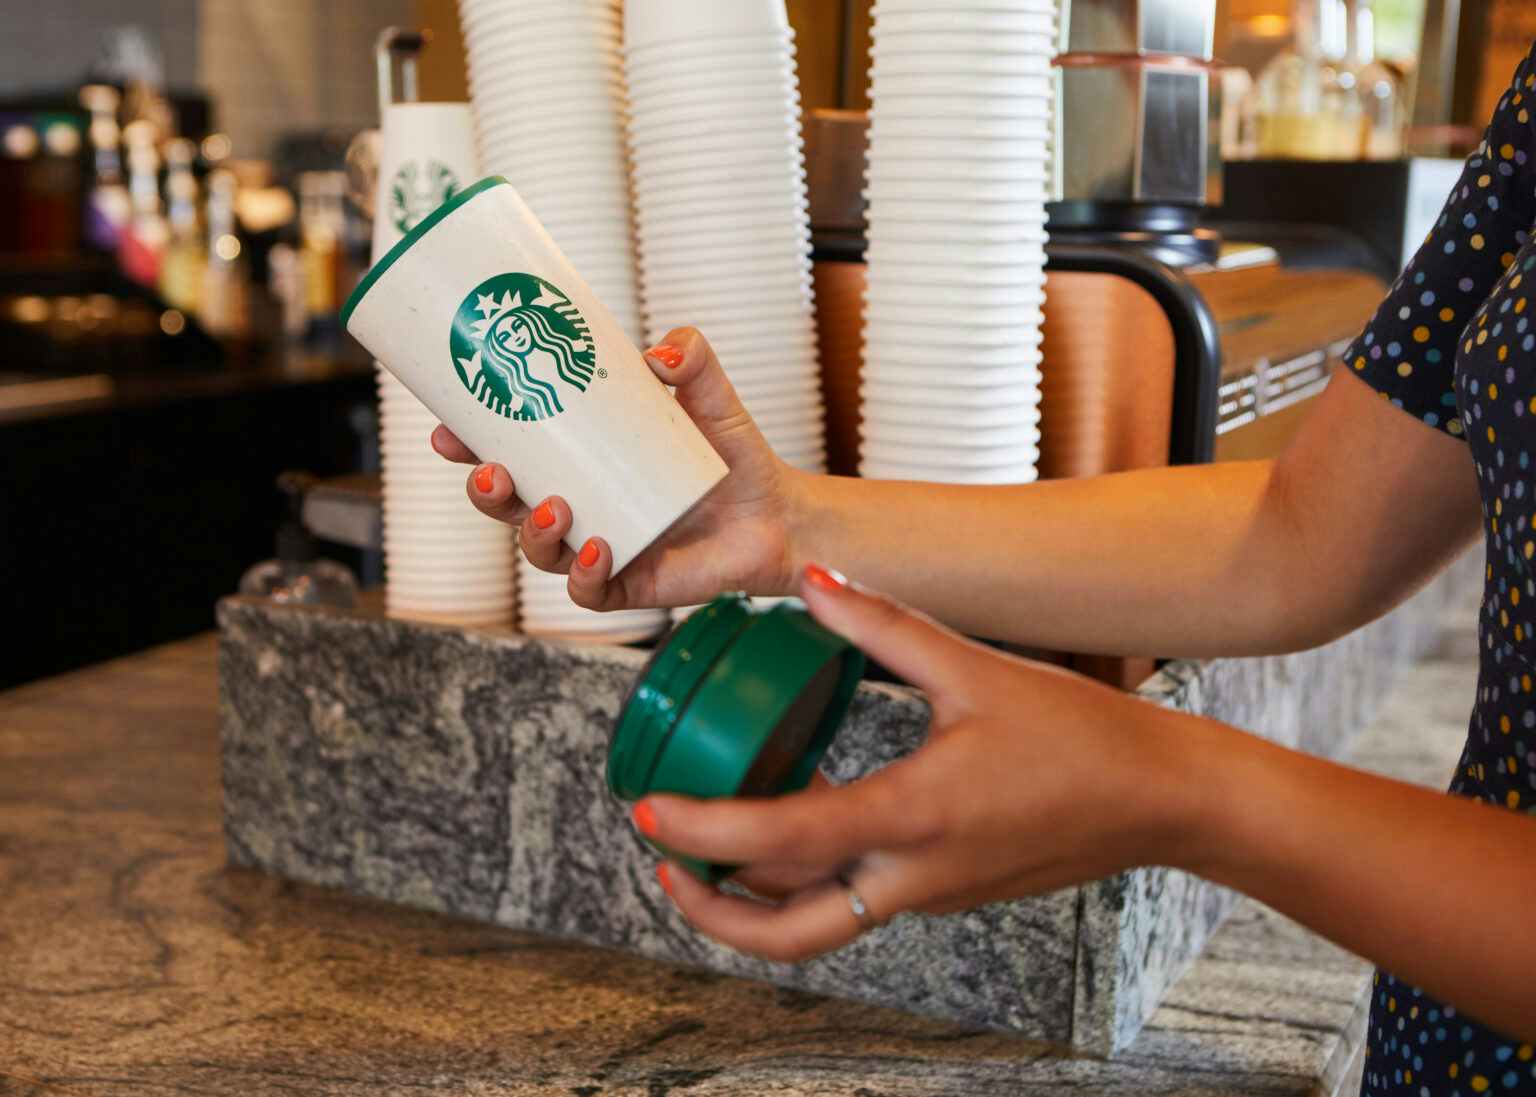 A person holding a Starbucks personal reusable cup at the cafe counter.